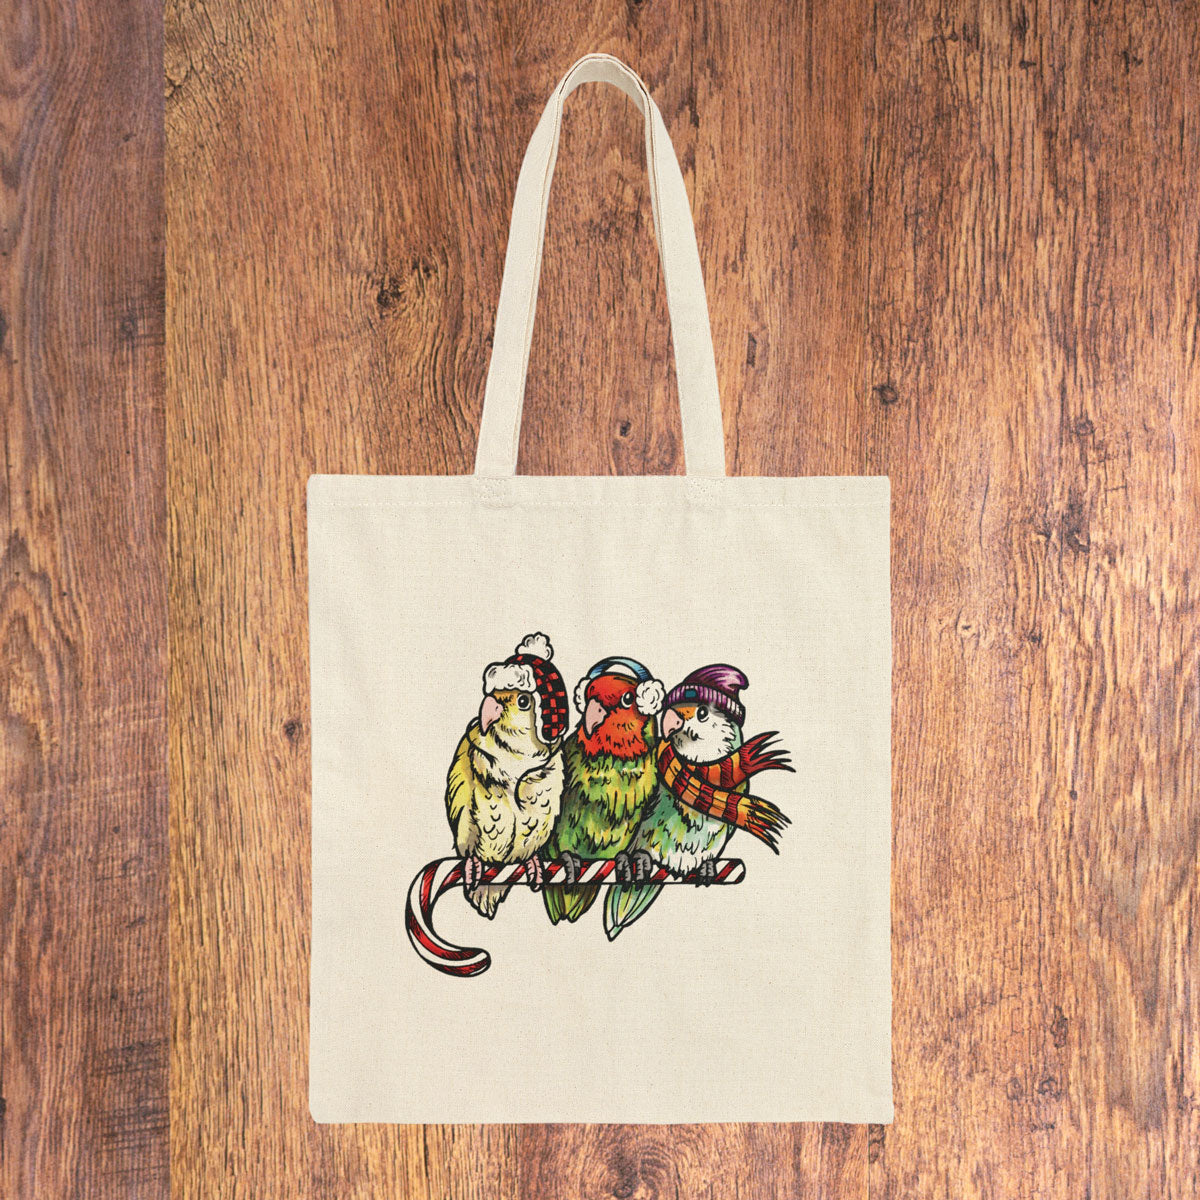 3 Lovebirds with Winter Wear & Perched on a Candy Cane, Cotton Canvas Tote Bag